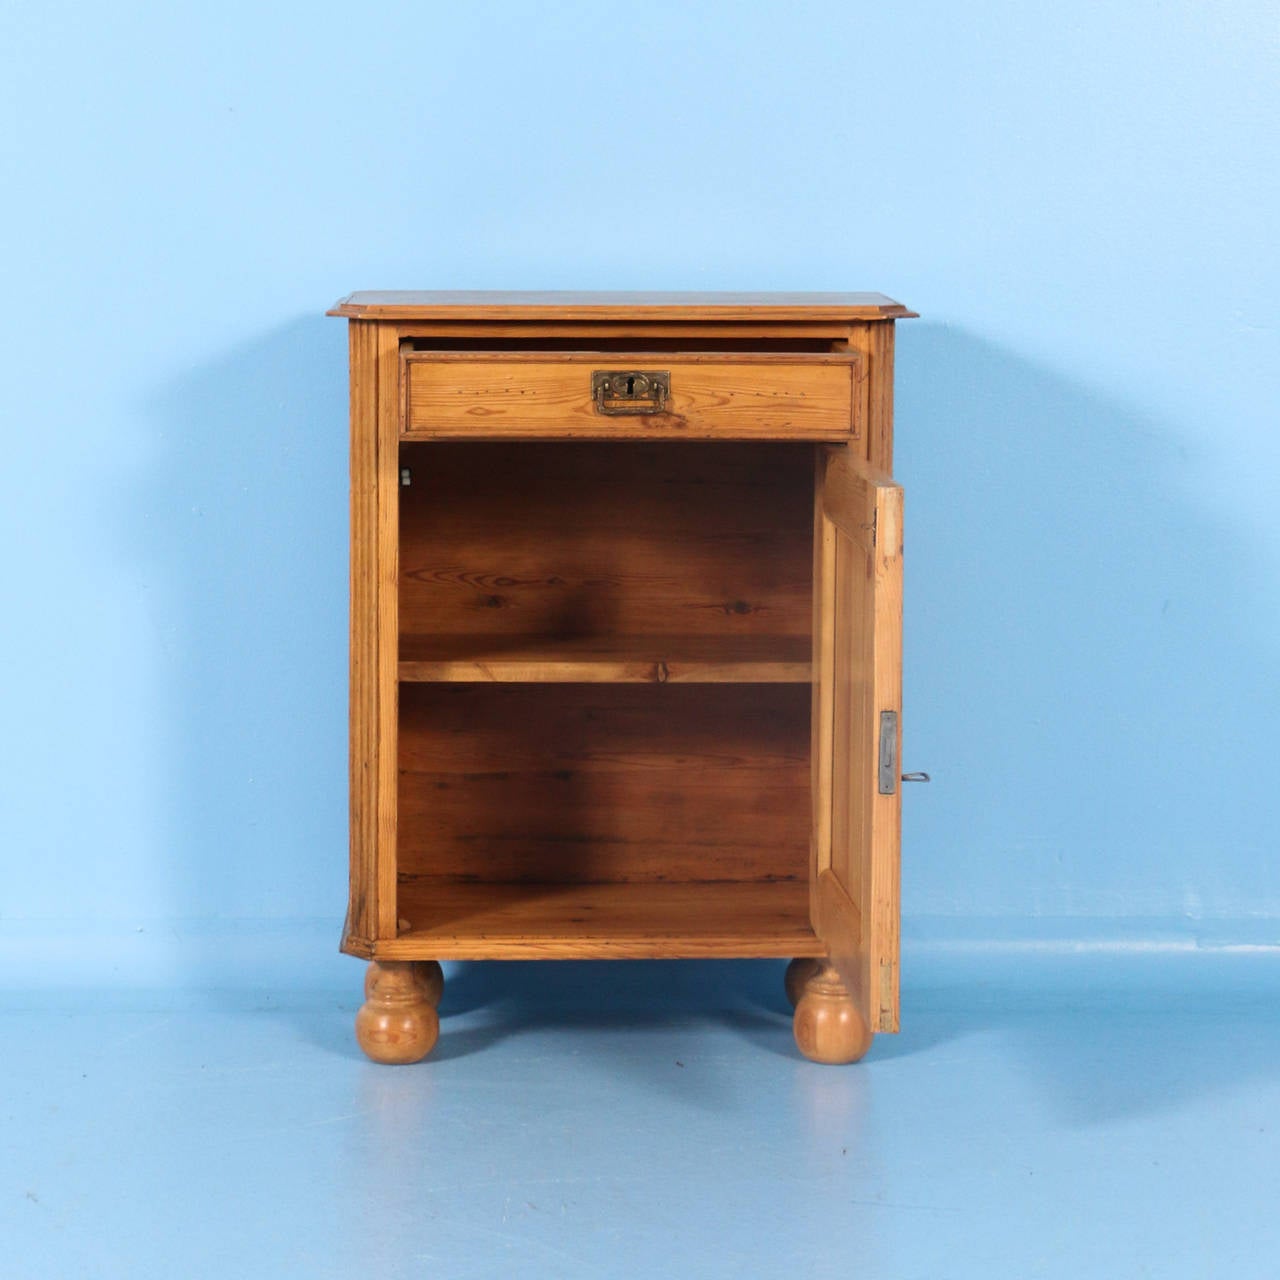 This Danish Pine nightstand has the traditional one drawer over one door for storage. It  has been given a wax finish, bringing out the warmth of the pine. Simple carved dentil molding along the sides add to its charm. The current feet are original